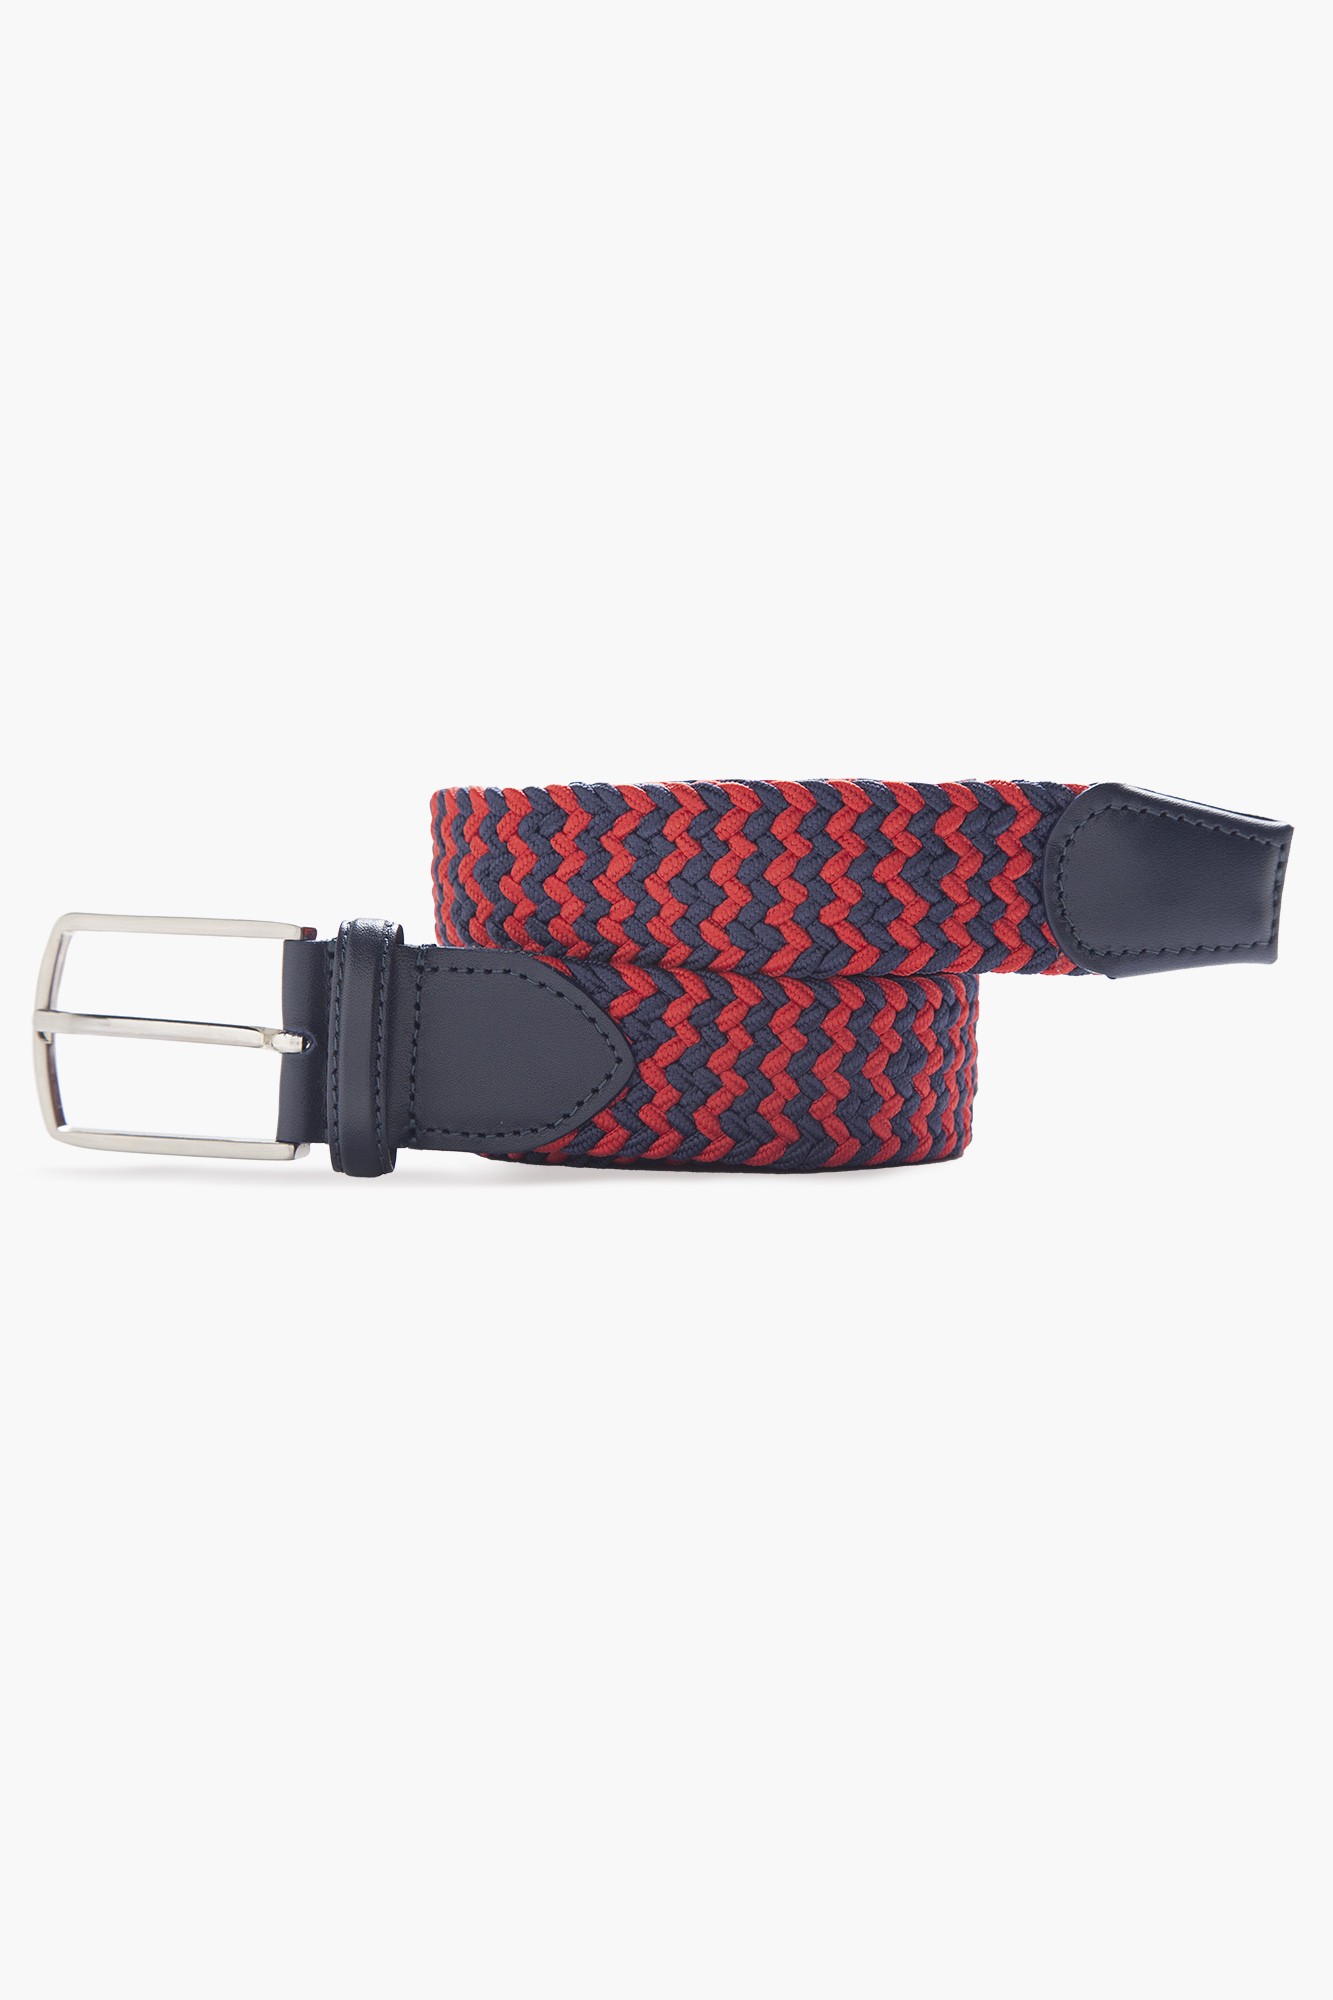 Elastic Knit Belt with Genuine Leather - Navy Red